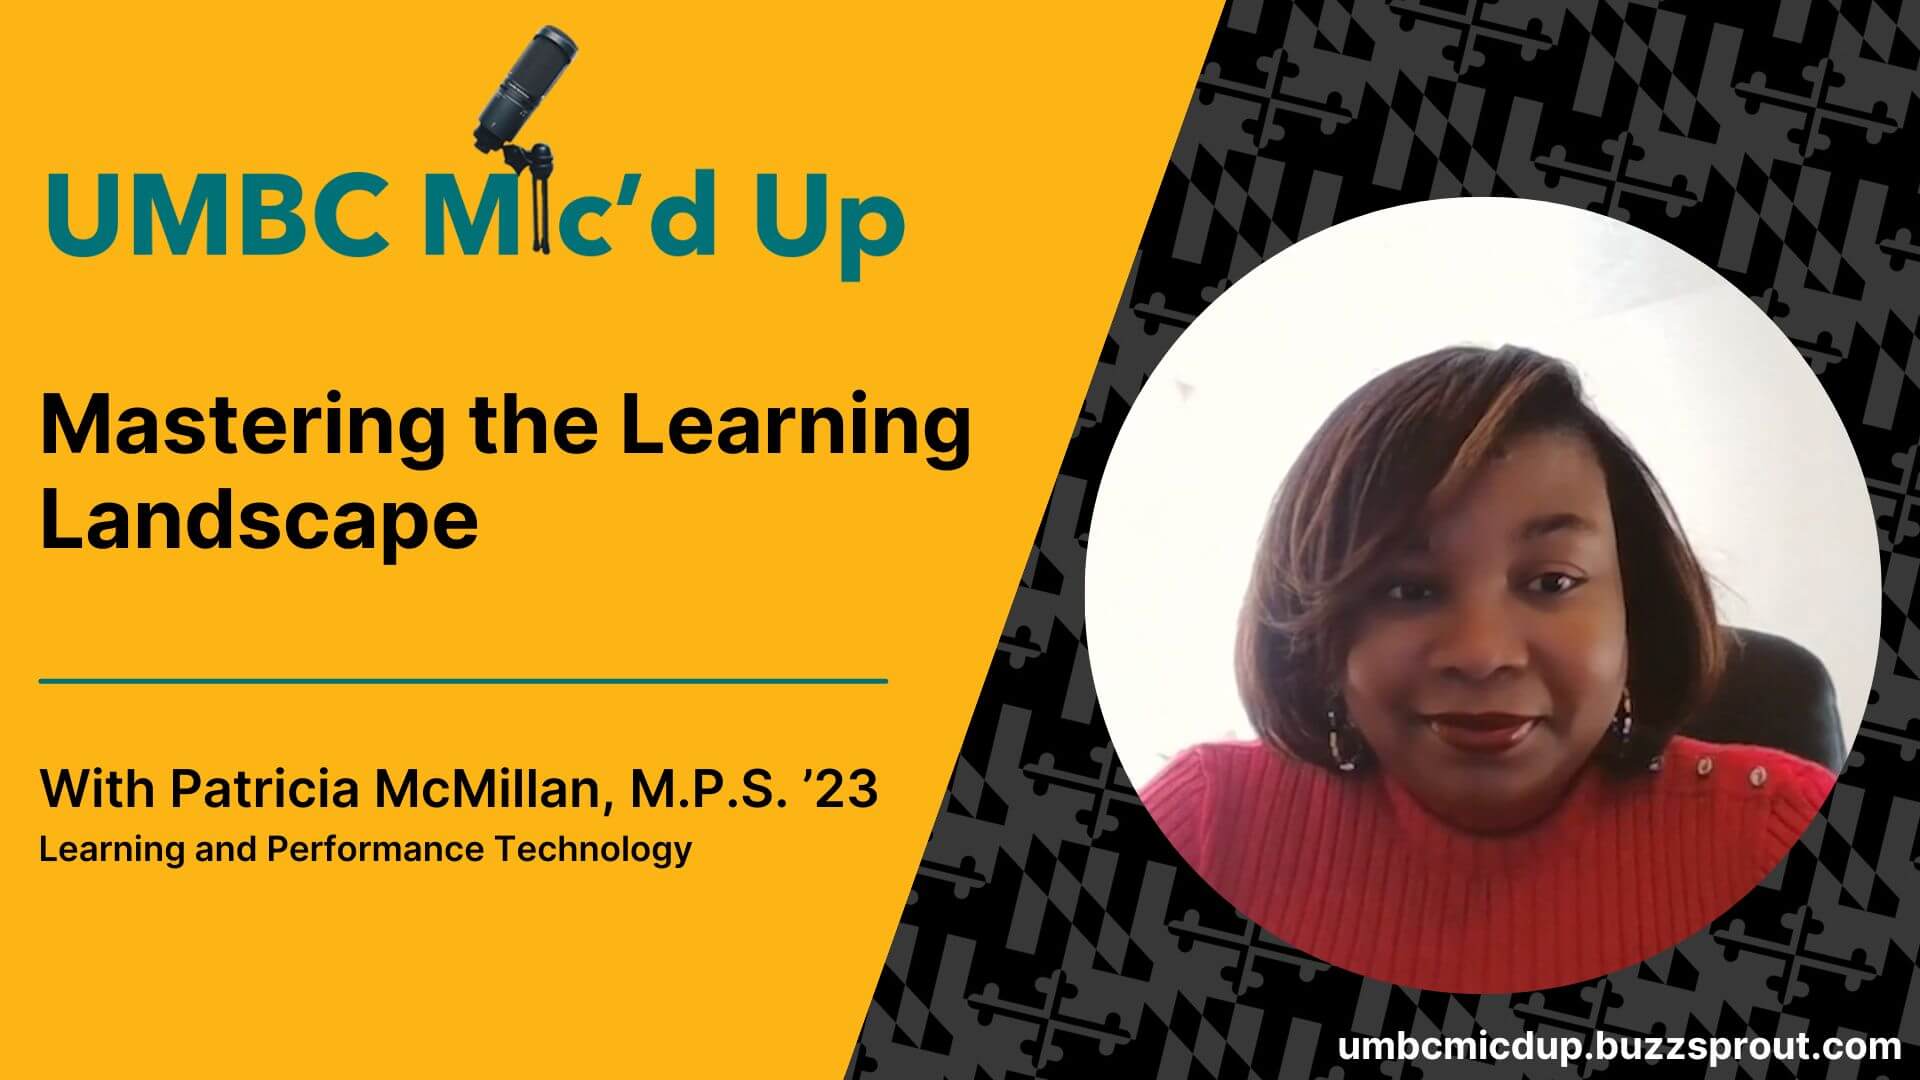 professional growth explored on this latest episode of UMBC Mic'd Up